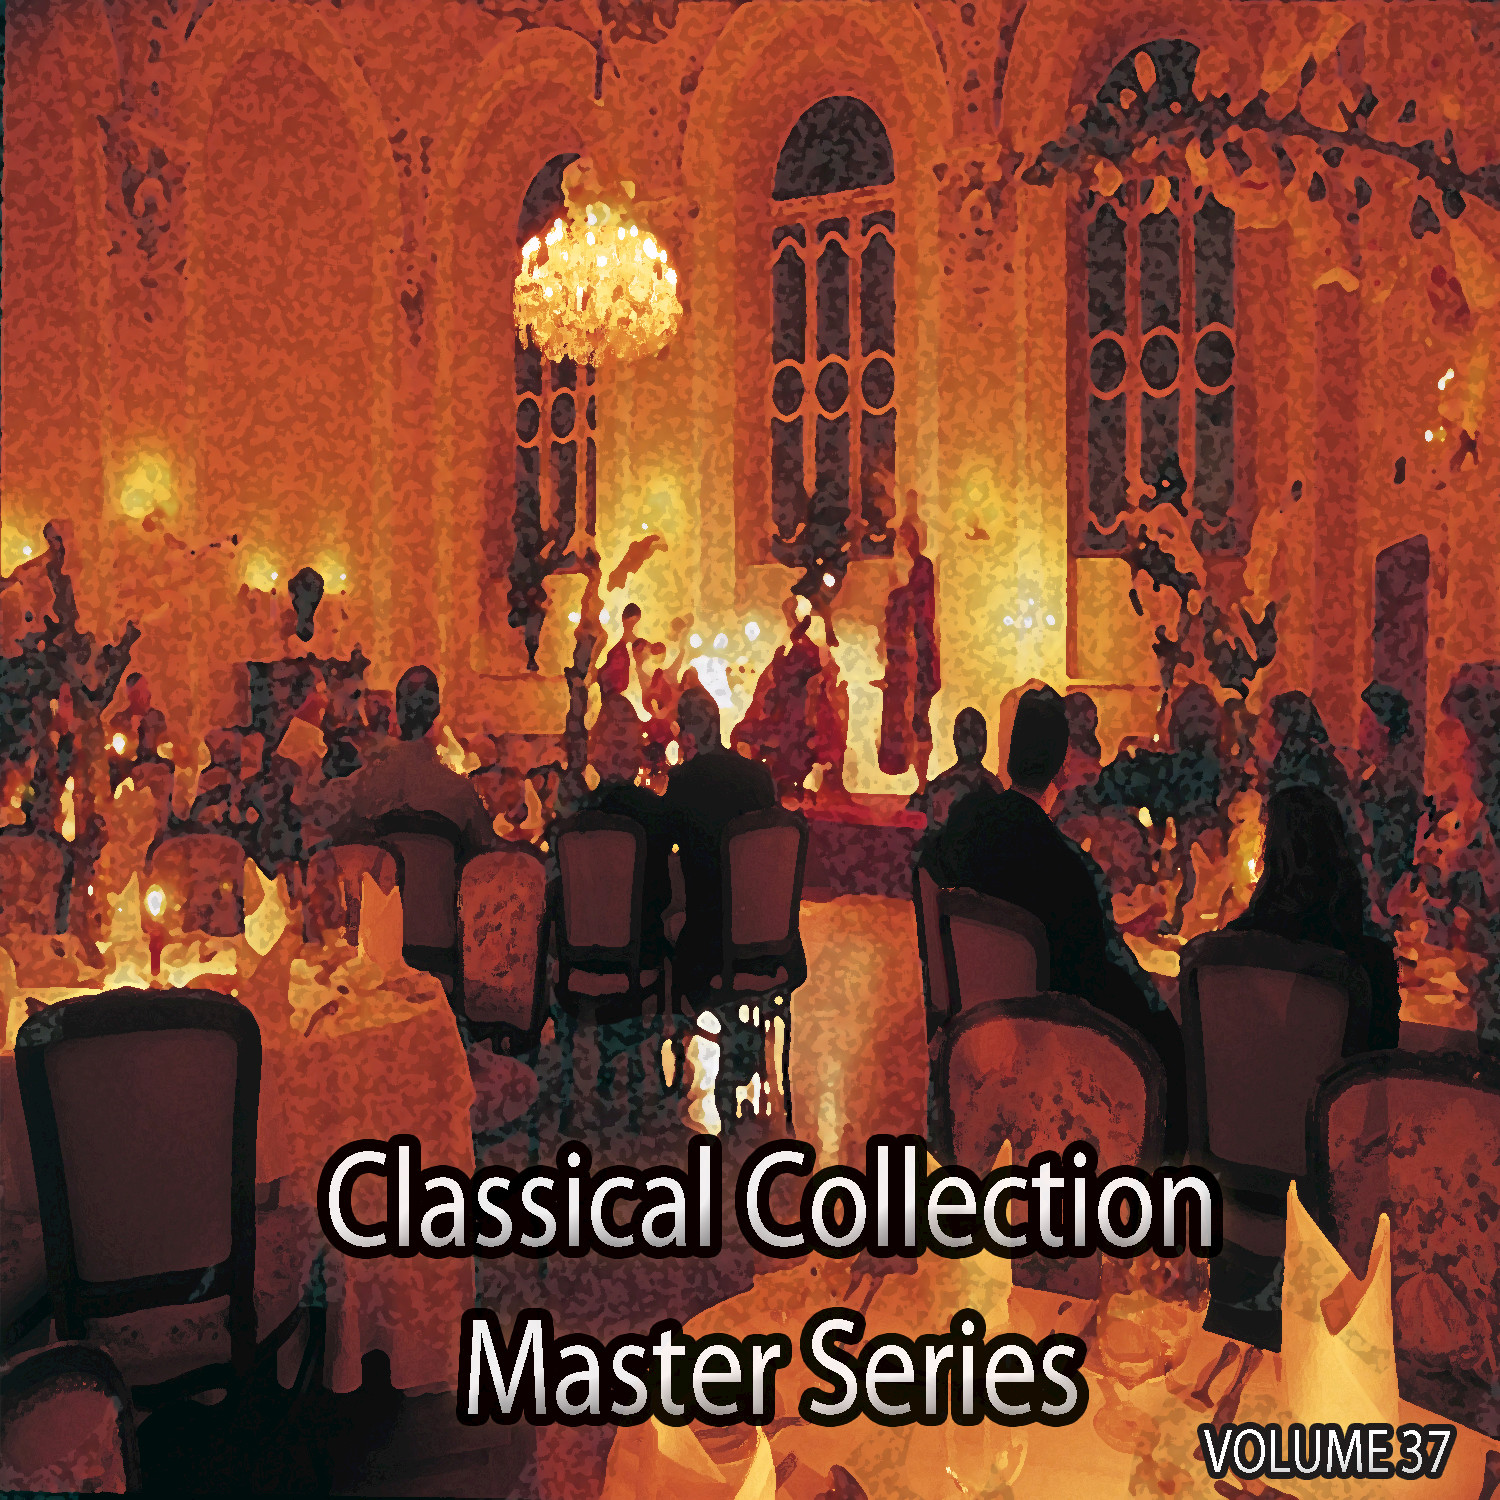 Variations on a Rococo Theme in A for Cello and Orchestra, Op. 33: Pt. 1